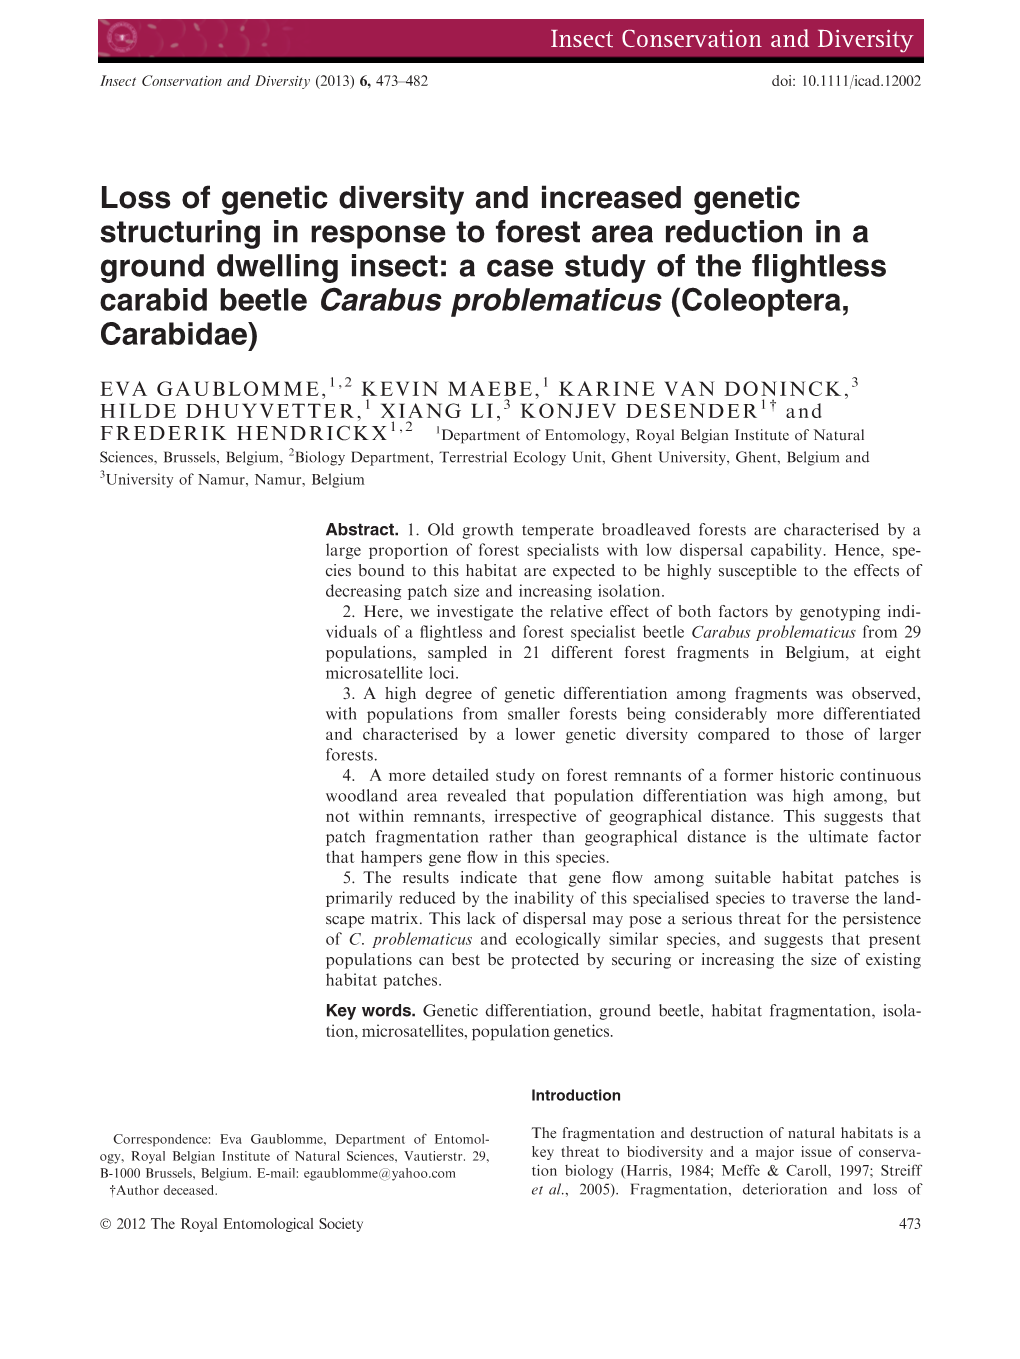 Loss of Genetic Diversity and Increased Genetic